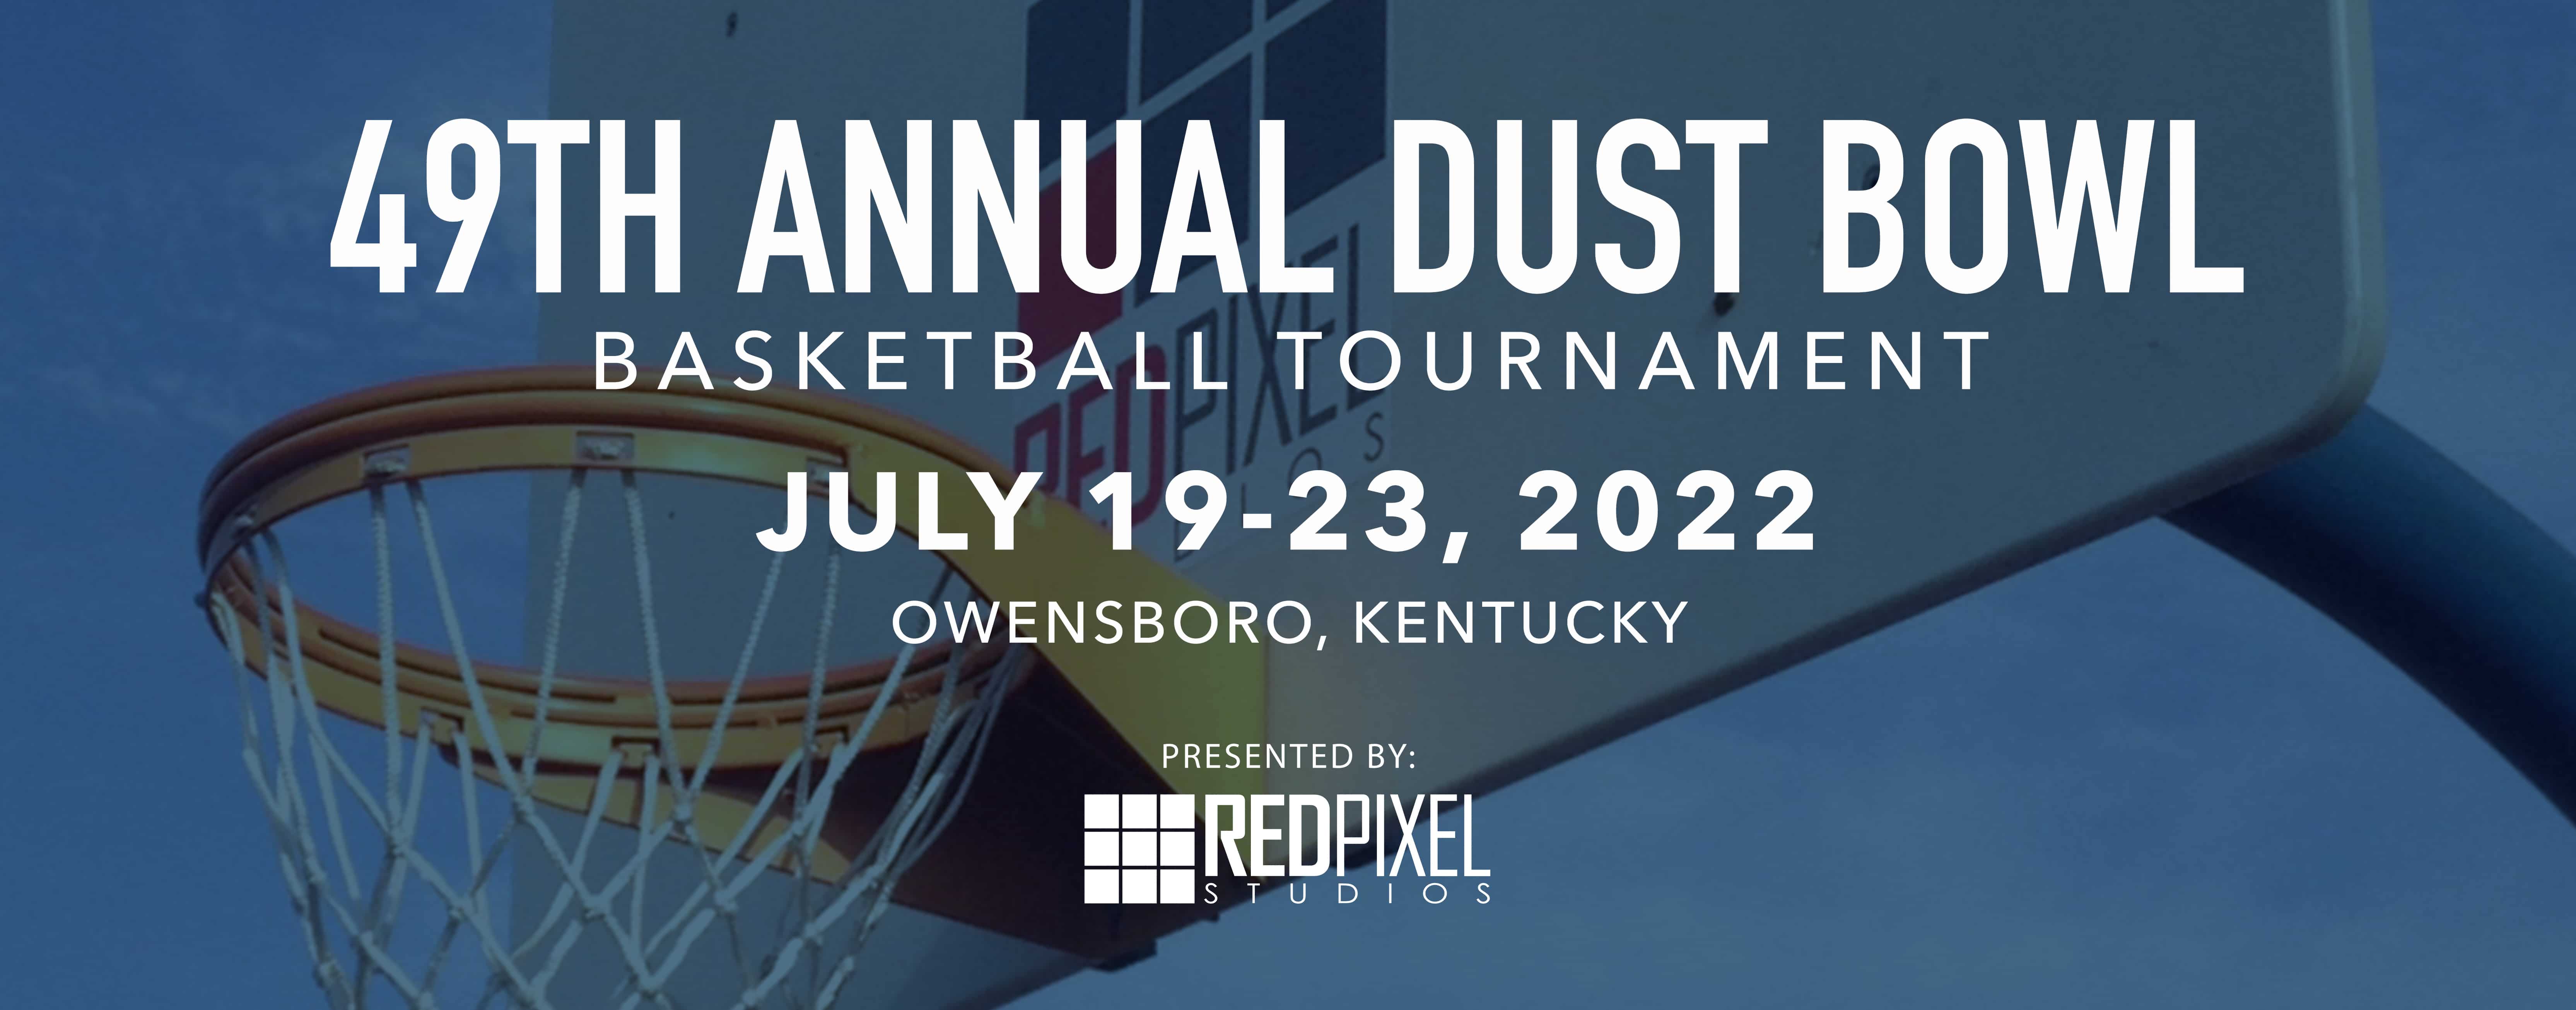 49th Annual Dust Bowl - July 15-23, 2022